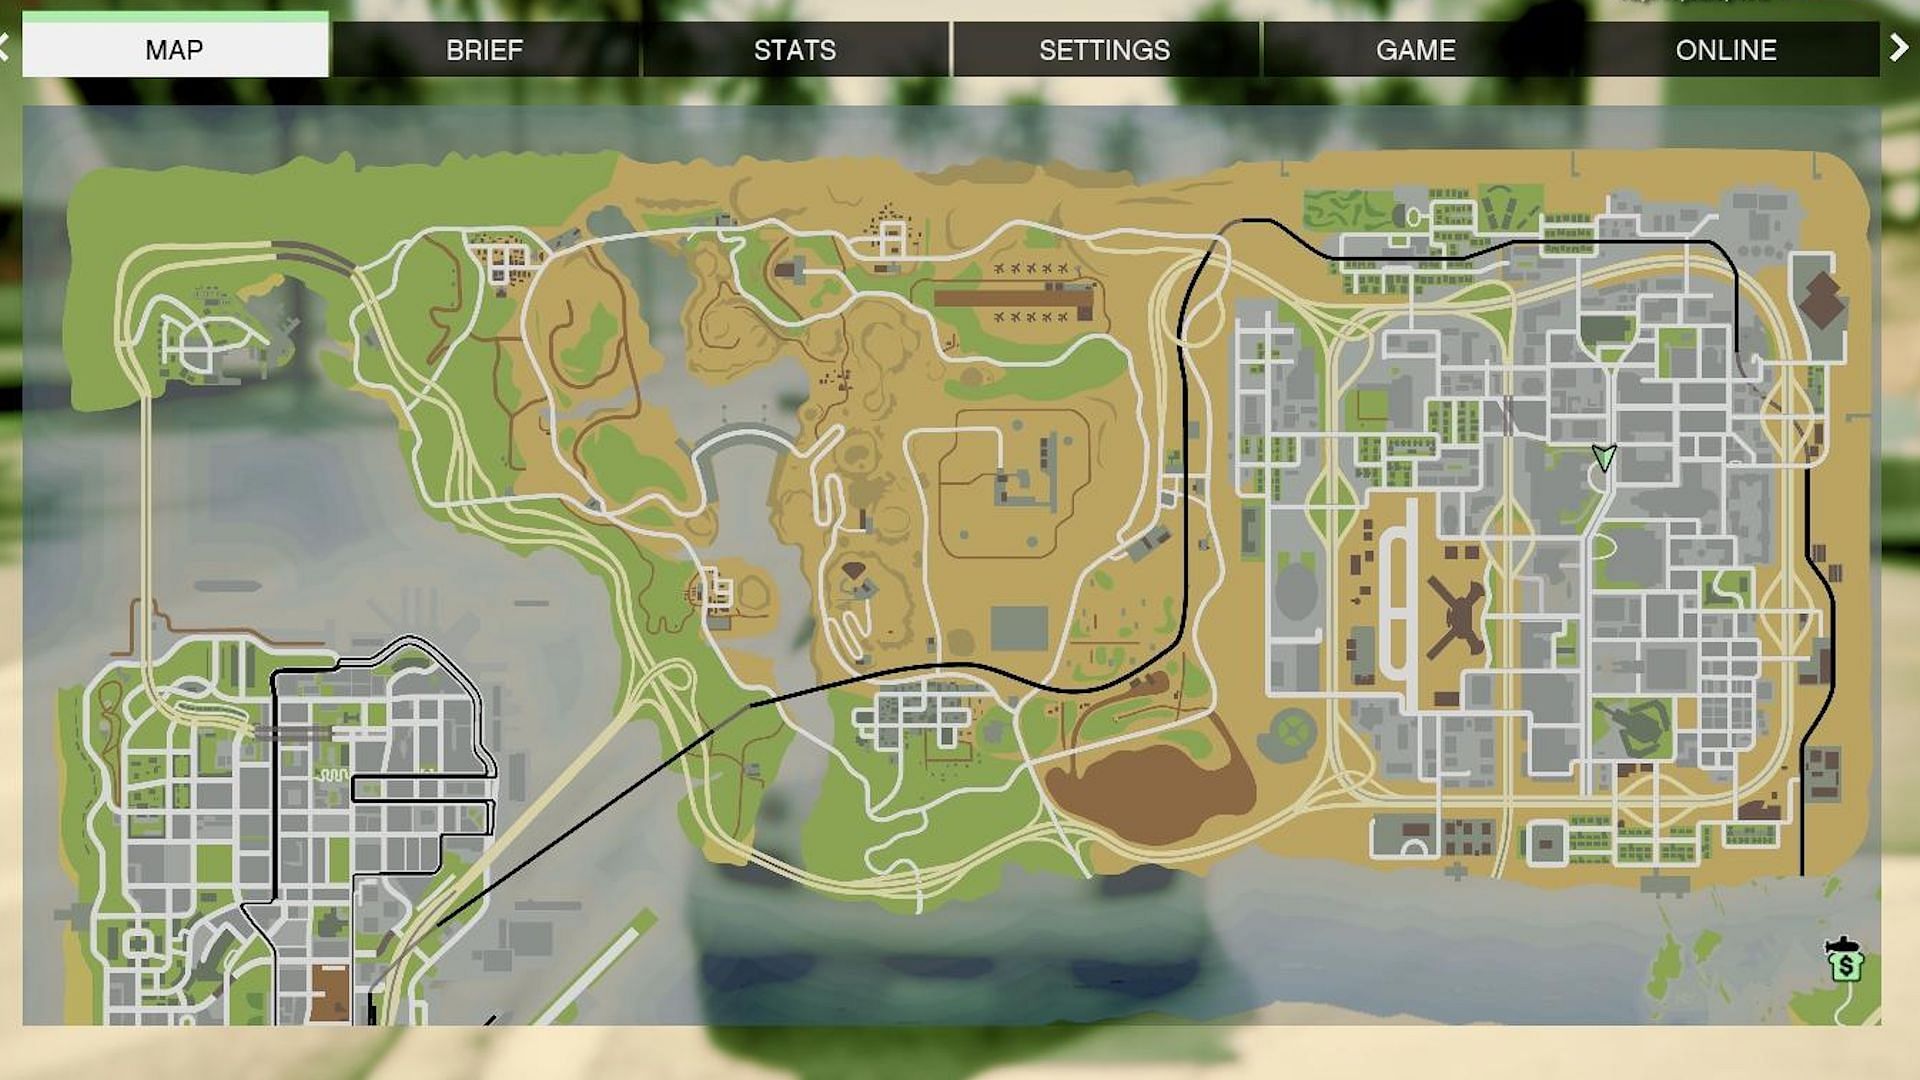 It is possible to visit old Grand Theft Auto locations thanks to the power of mods